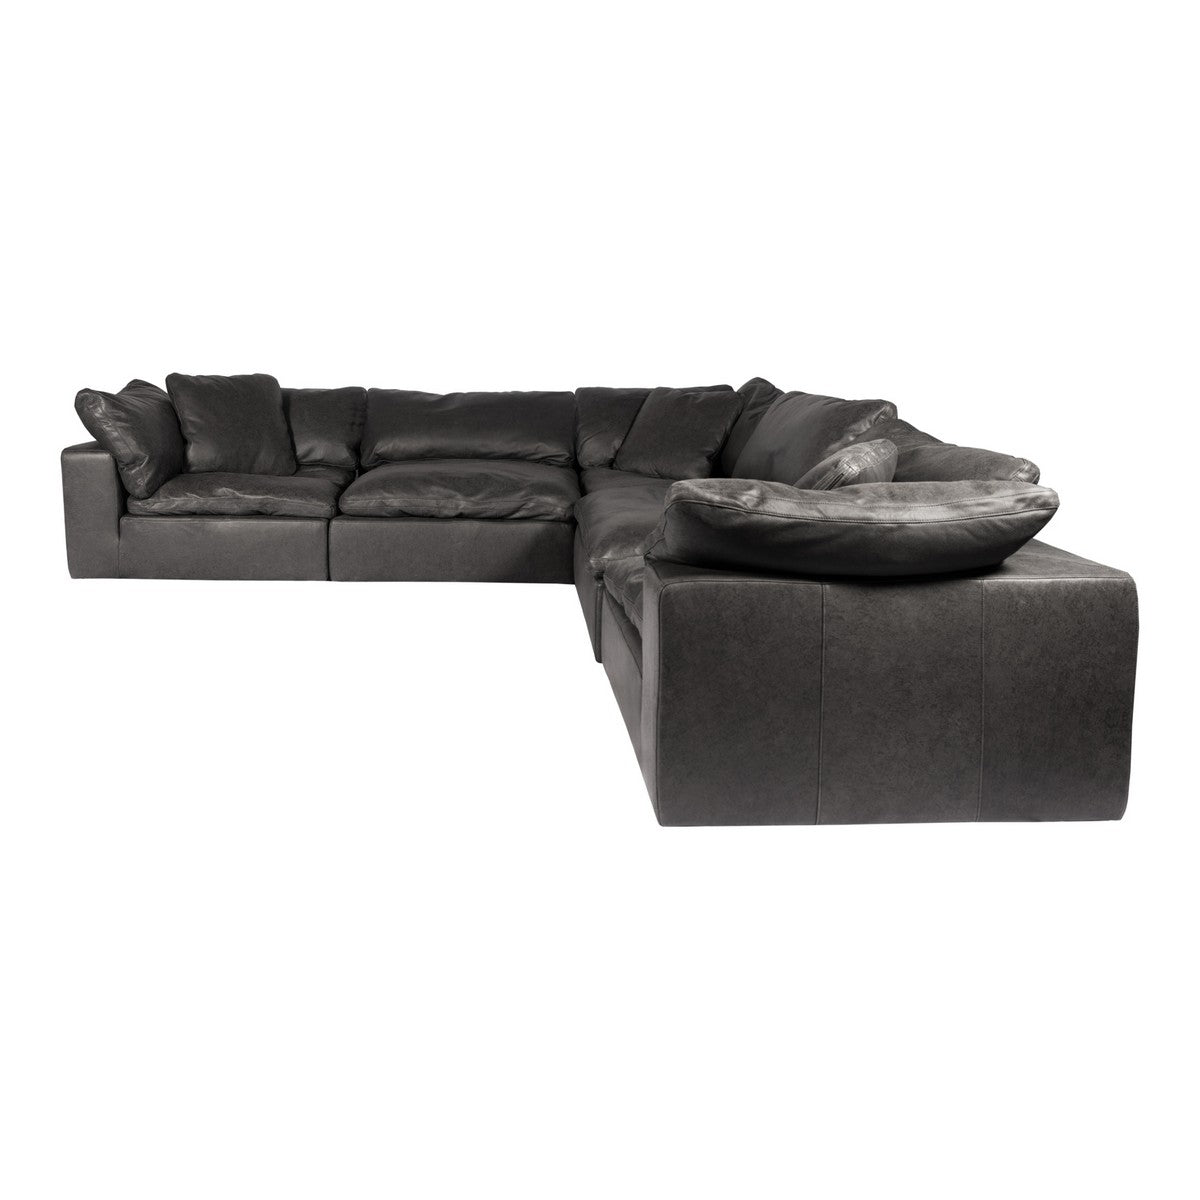 Moe's Home Collection Clay Classic L Modular Sectional Nubuck Leather Black - YJ-1010-02 - Moe's Home Collection - Extras - Minimal And Modern - 1